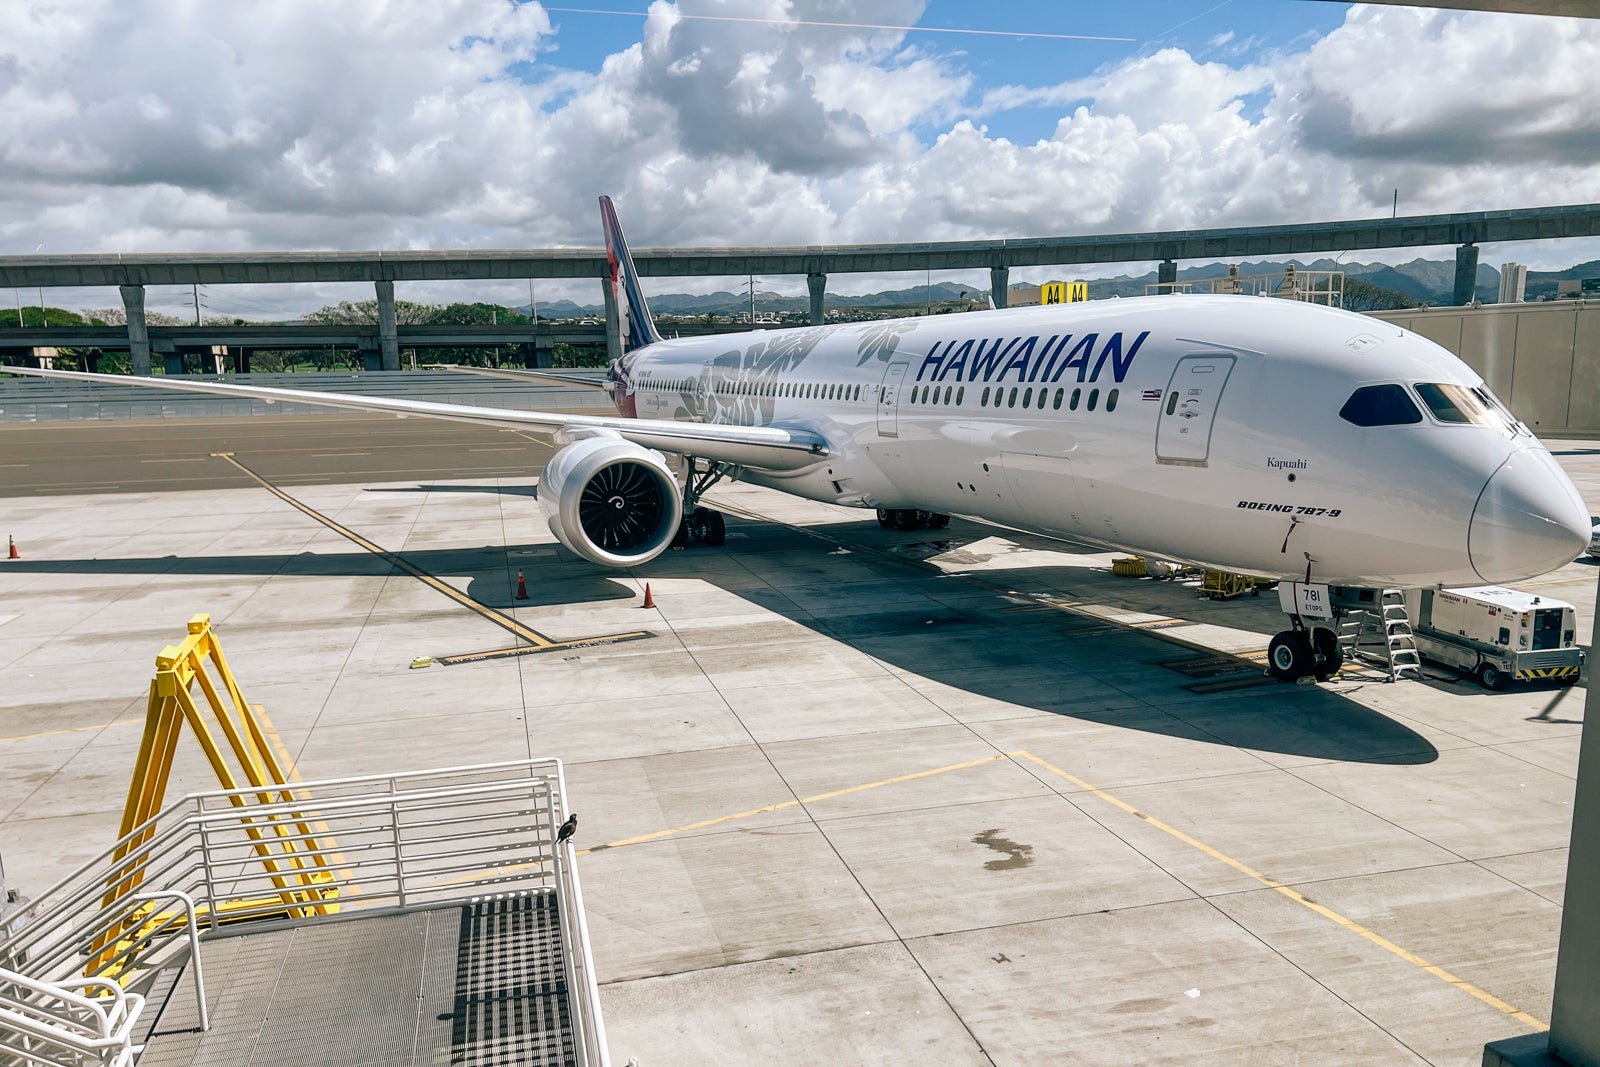 A new era for Hawaiian Airlines as it launches Dreamliner service: TPG was on the inaugural